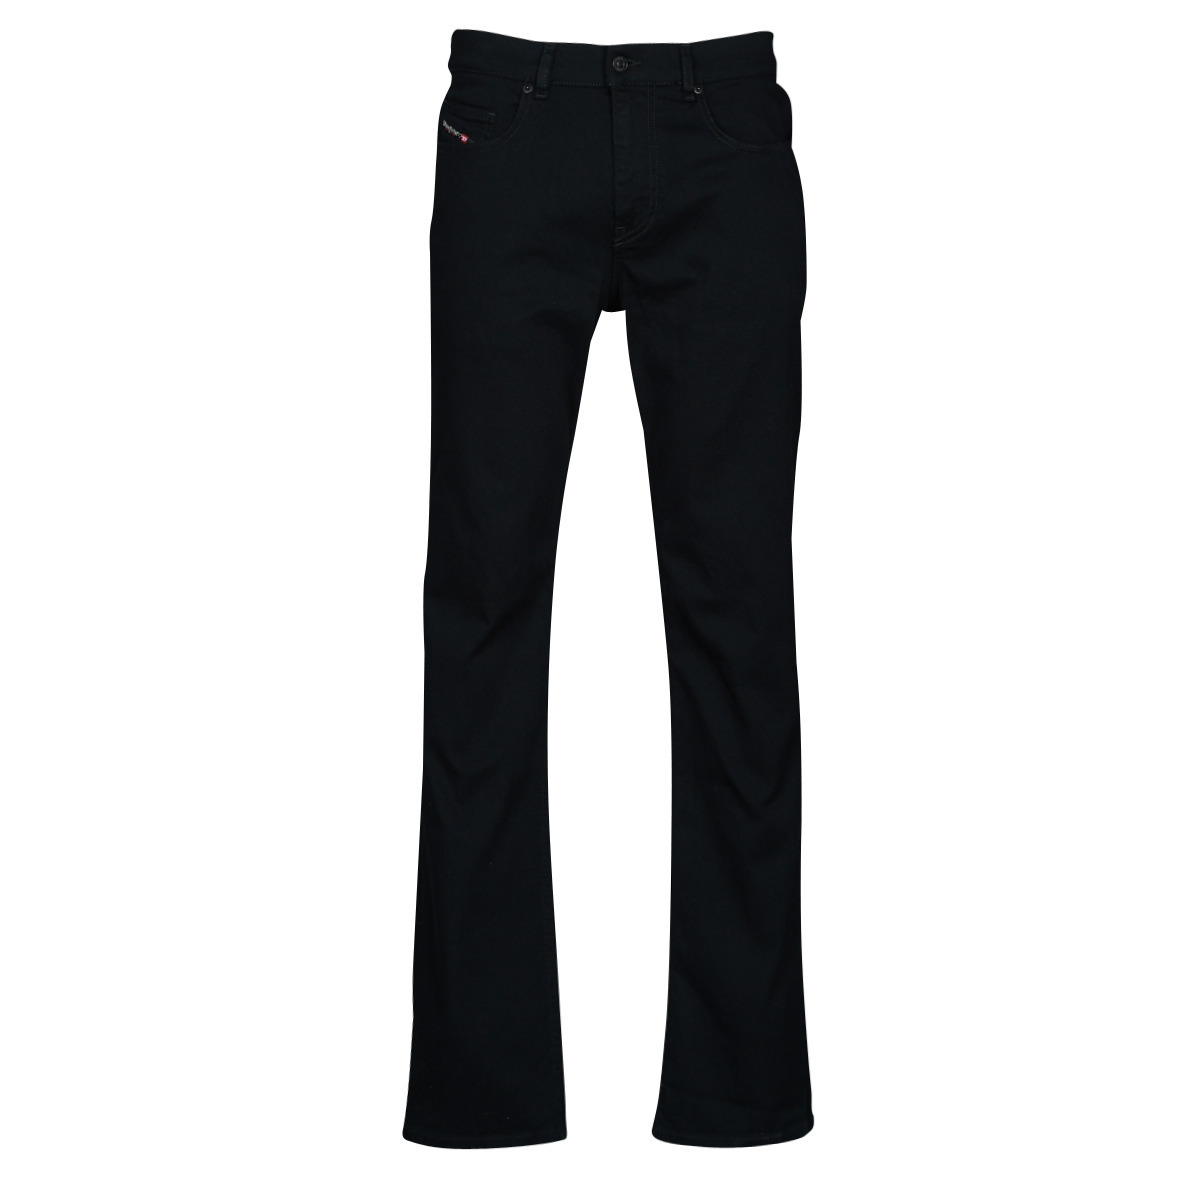 Gents Bootcut Jeans Black at Spartoo GOOFASH